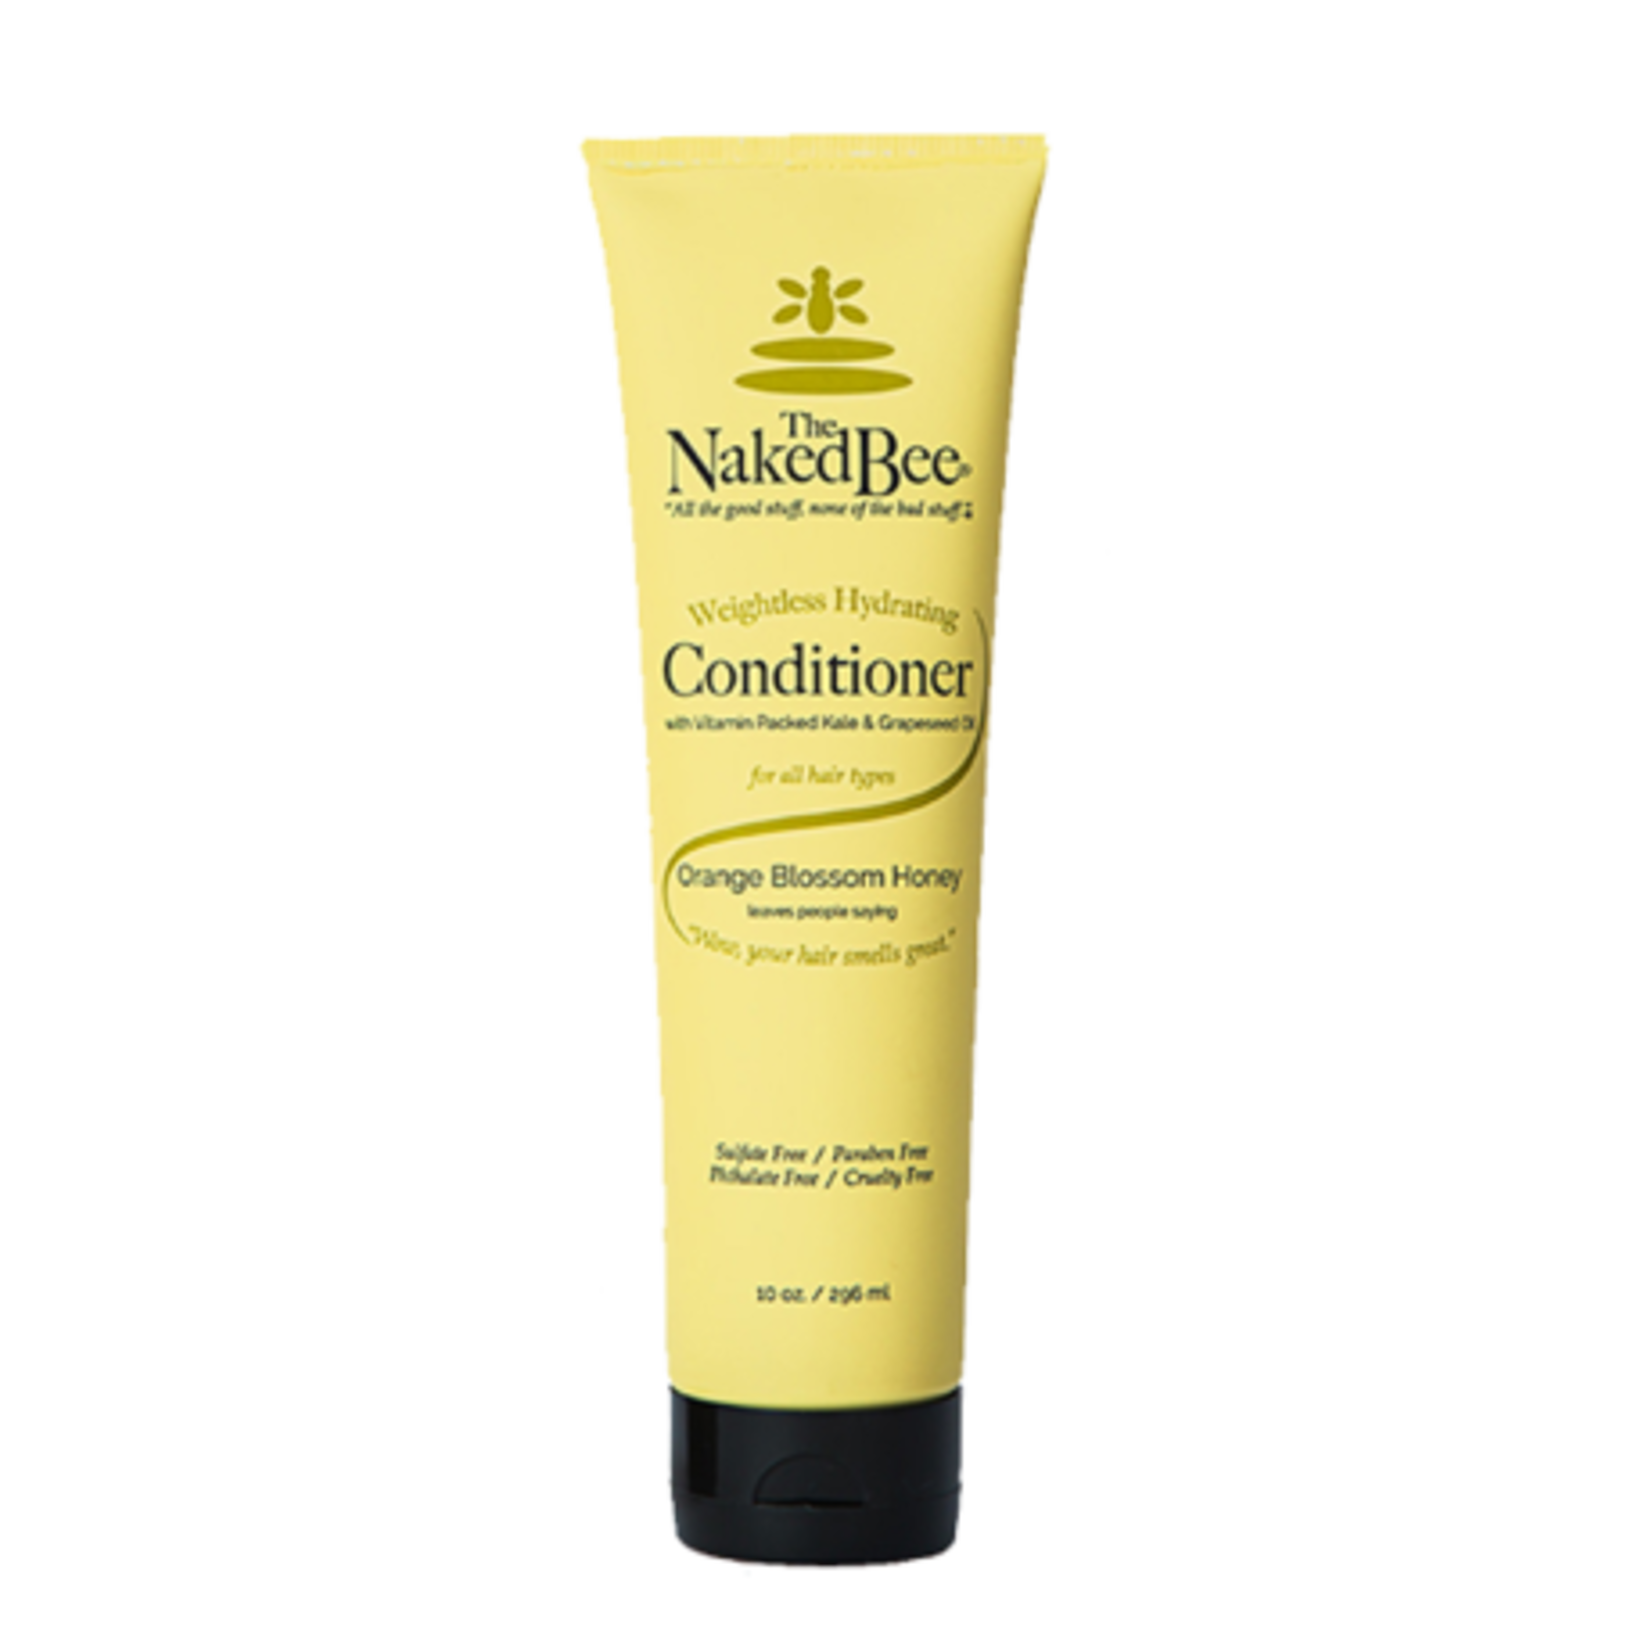 The Naked Bee The Naked Bee Weightless Hydrating Conditioner